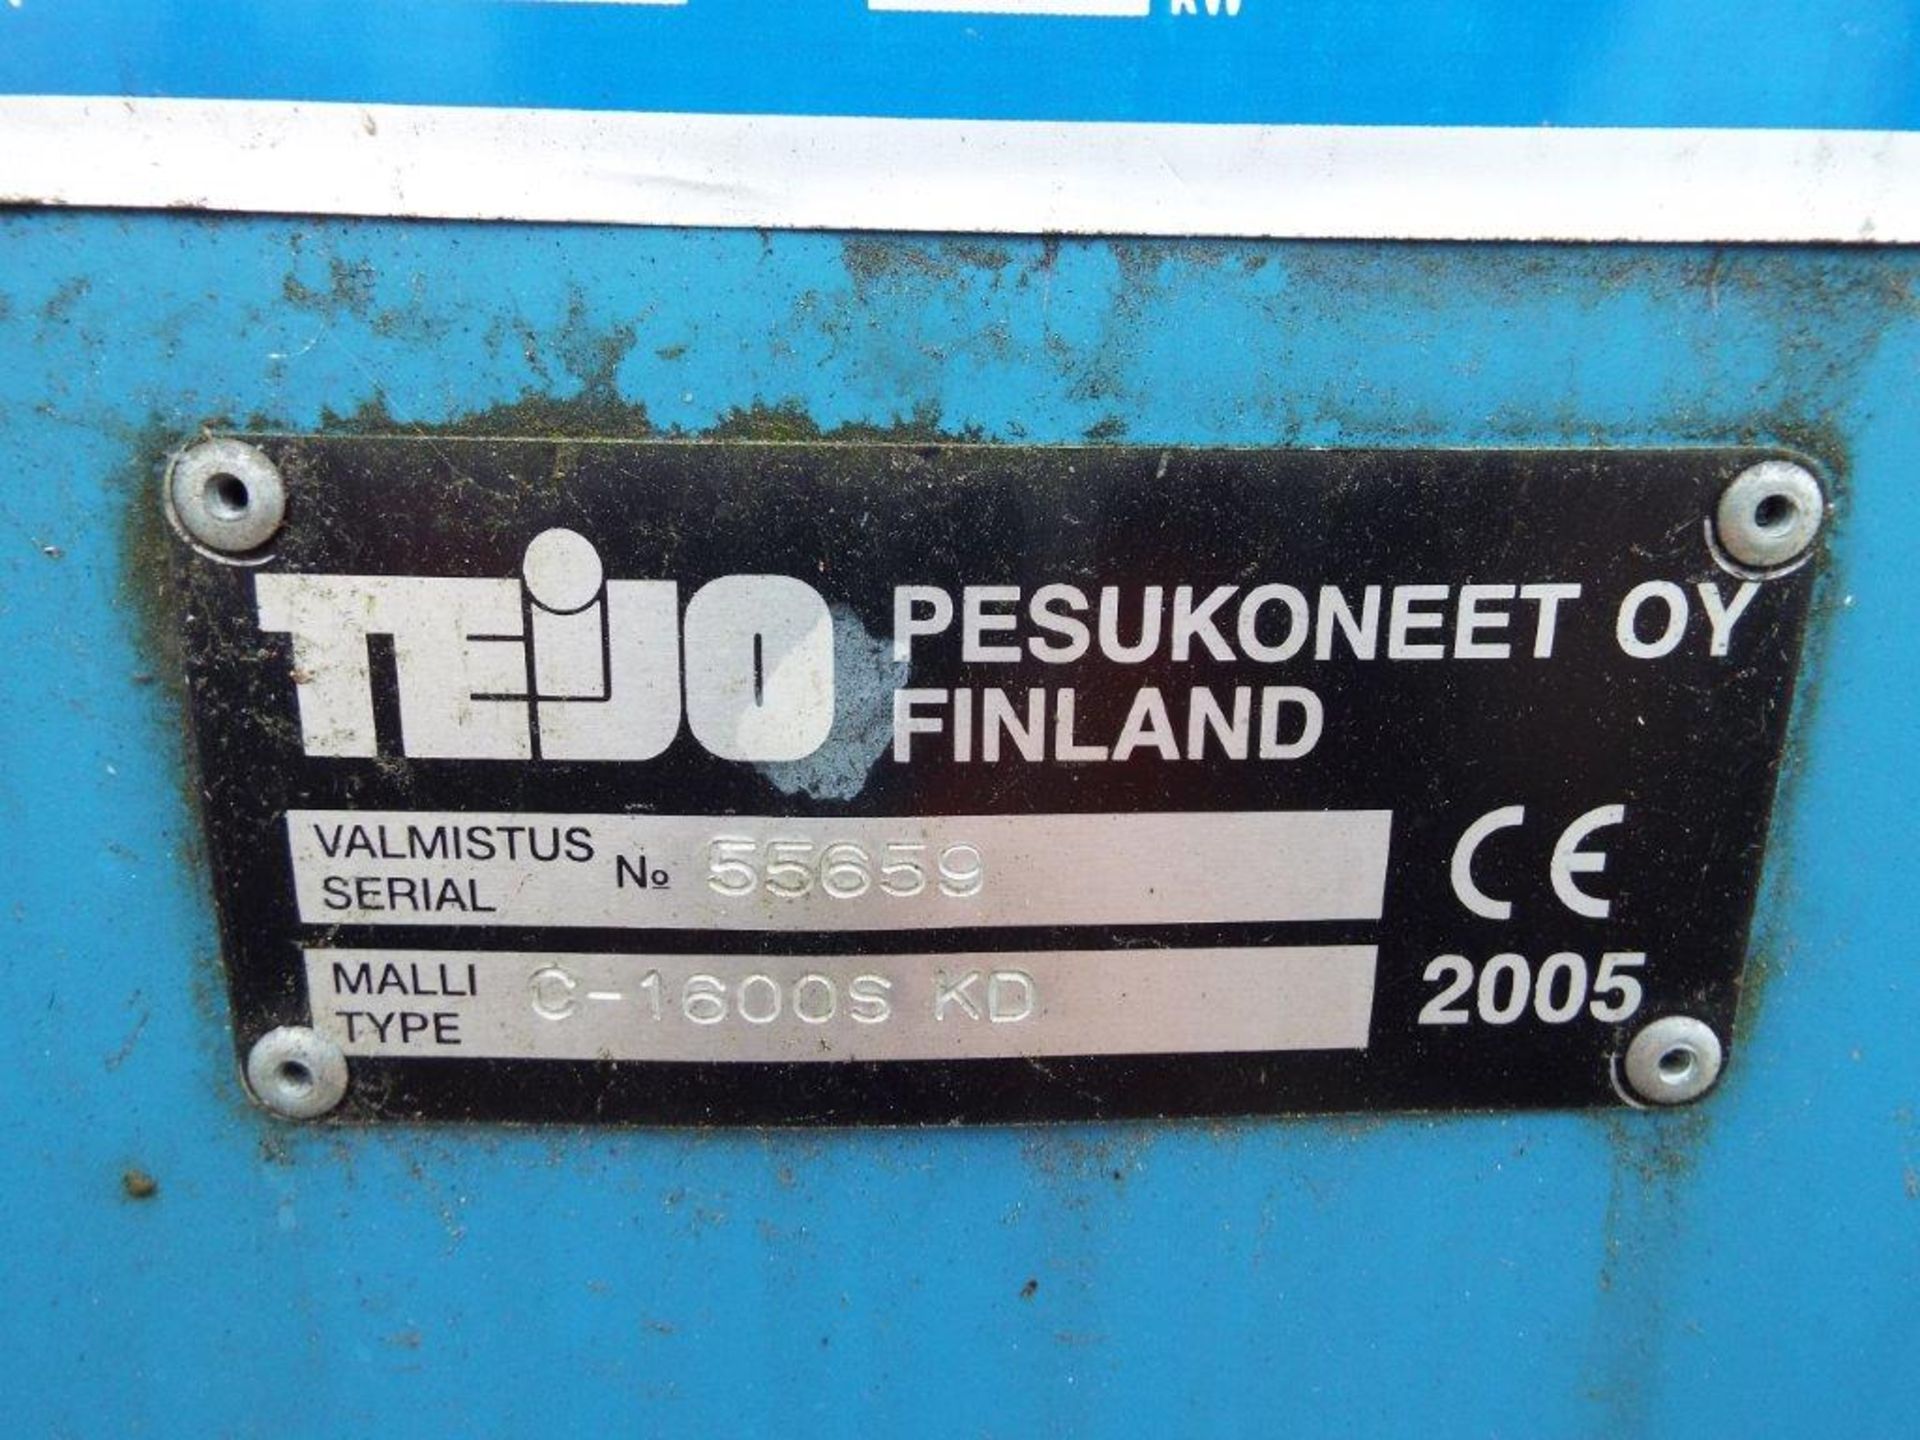 Teijo C-1600S KD Front Loading Parts Washer - Image 13 of 14